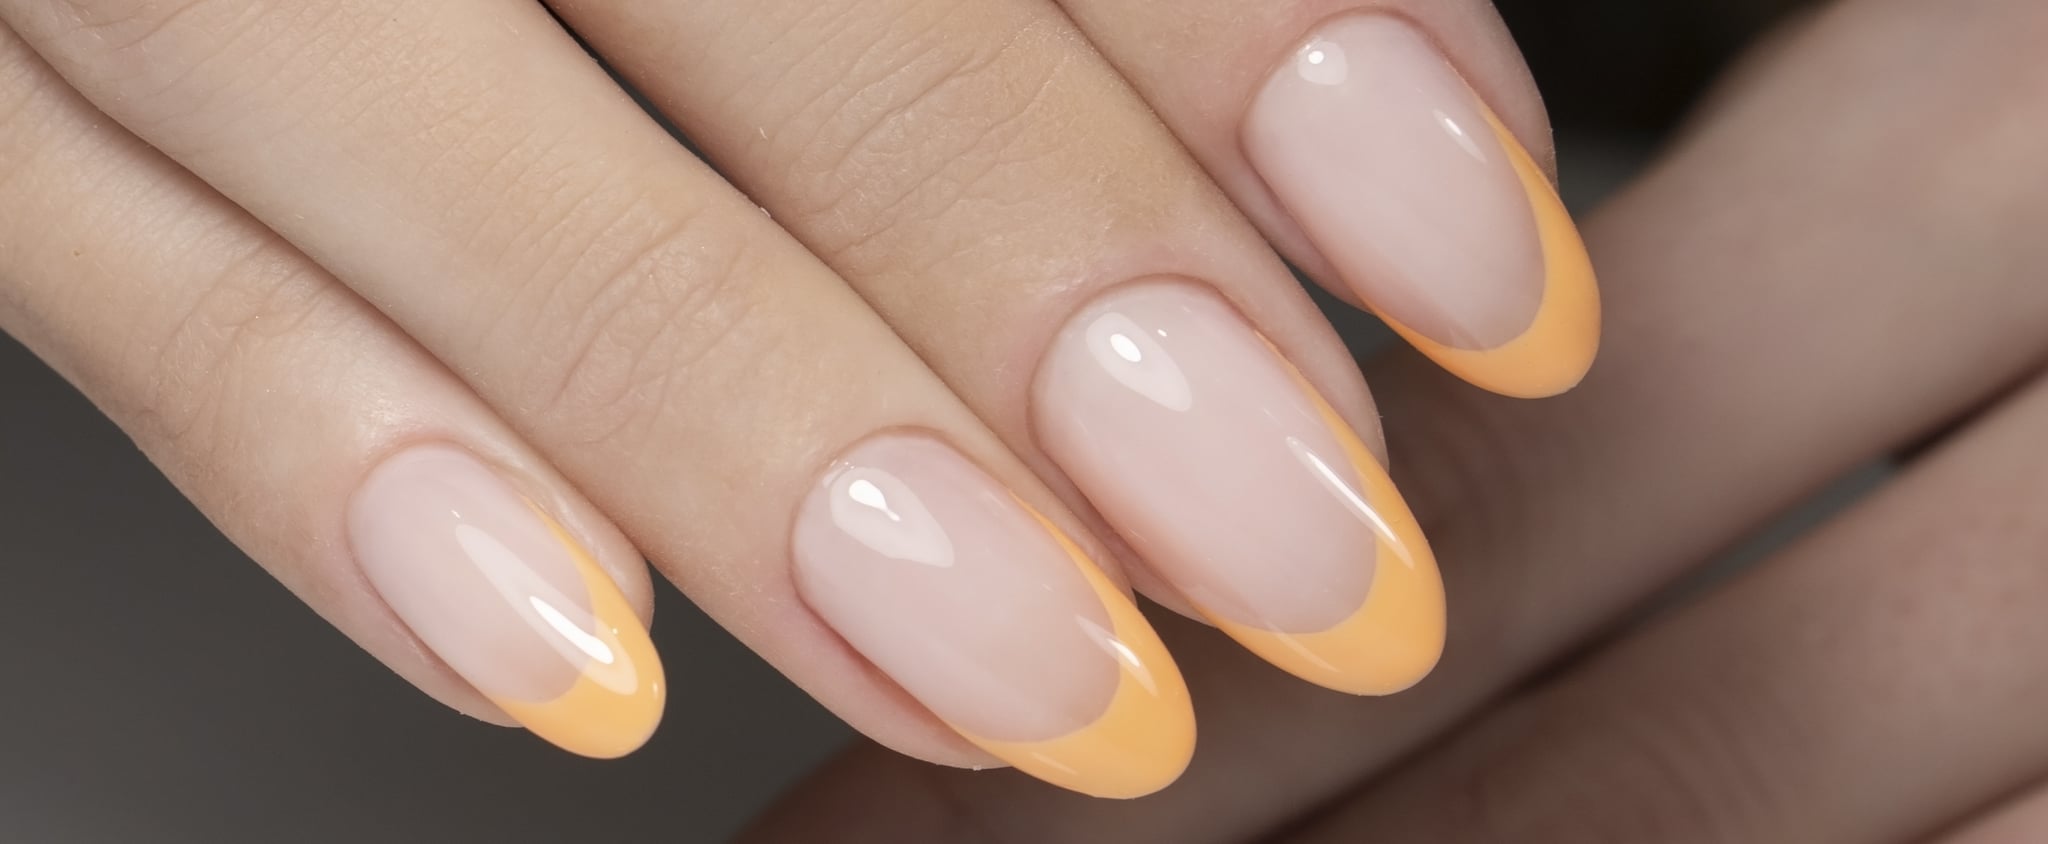 French Manicures: 25 Ideas and Photos | POPSUGAR Beauty